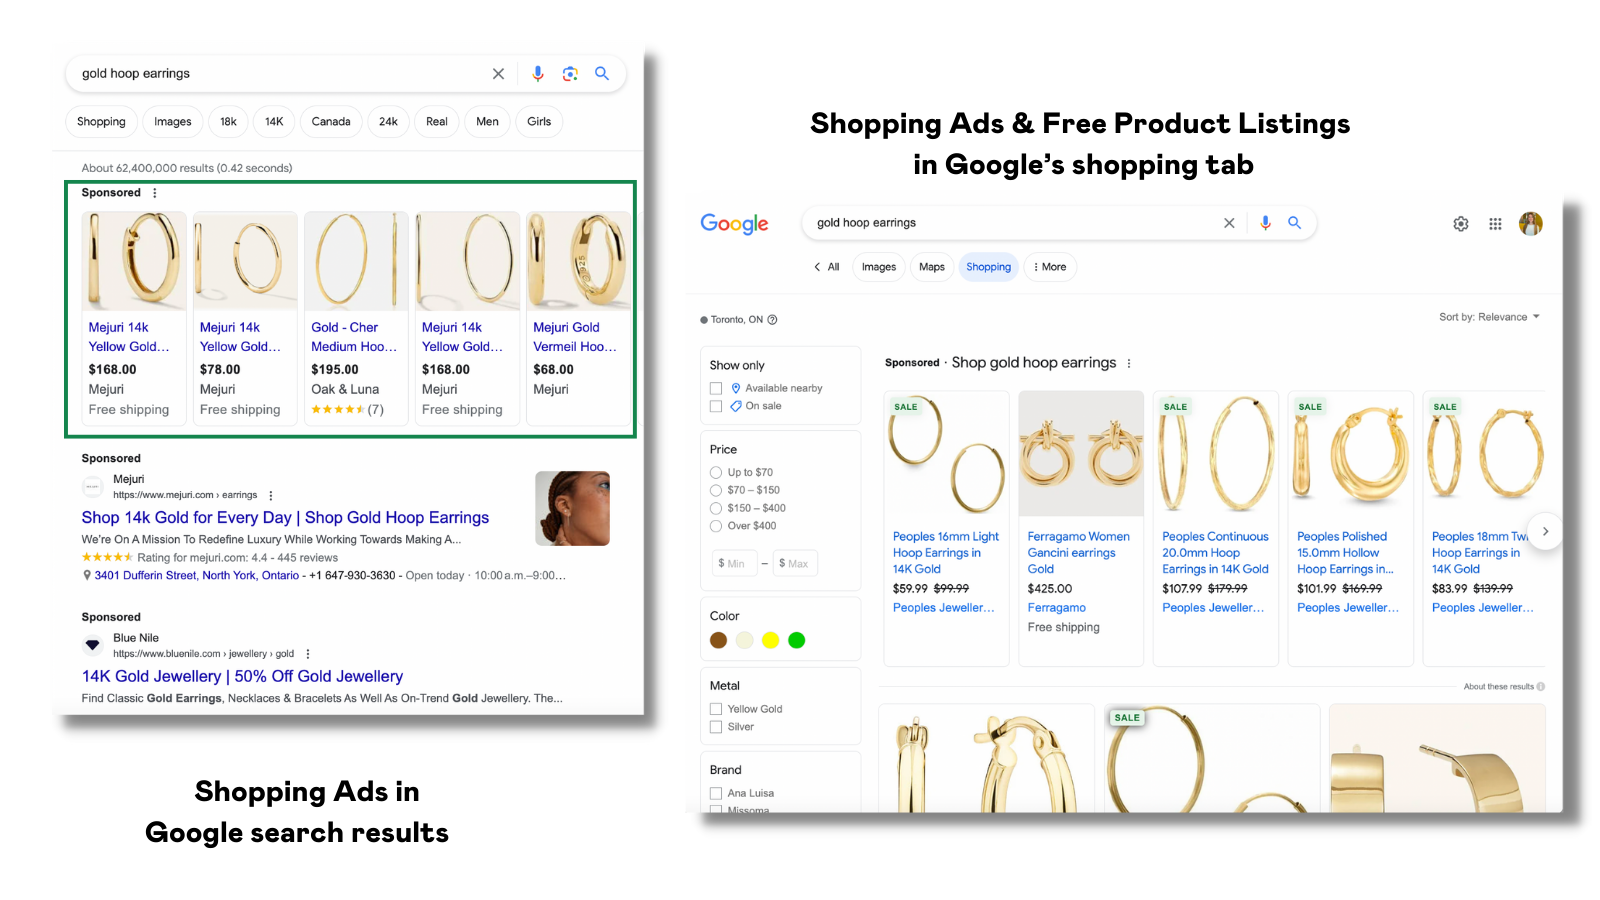 Example of Free Product Listings and Shopping Ads in Google Shopping